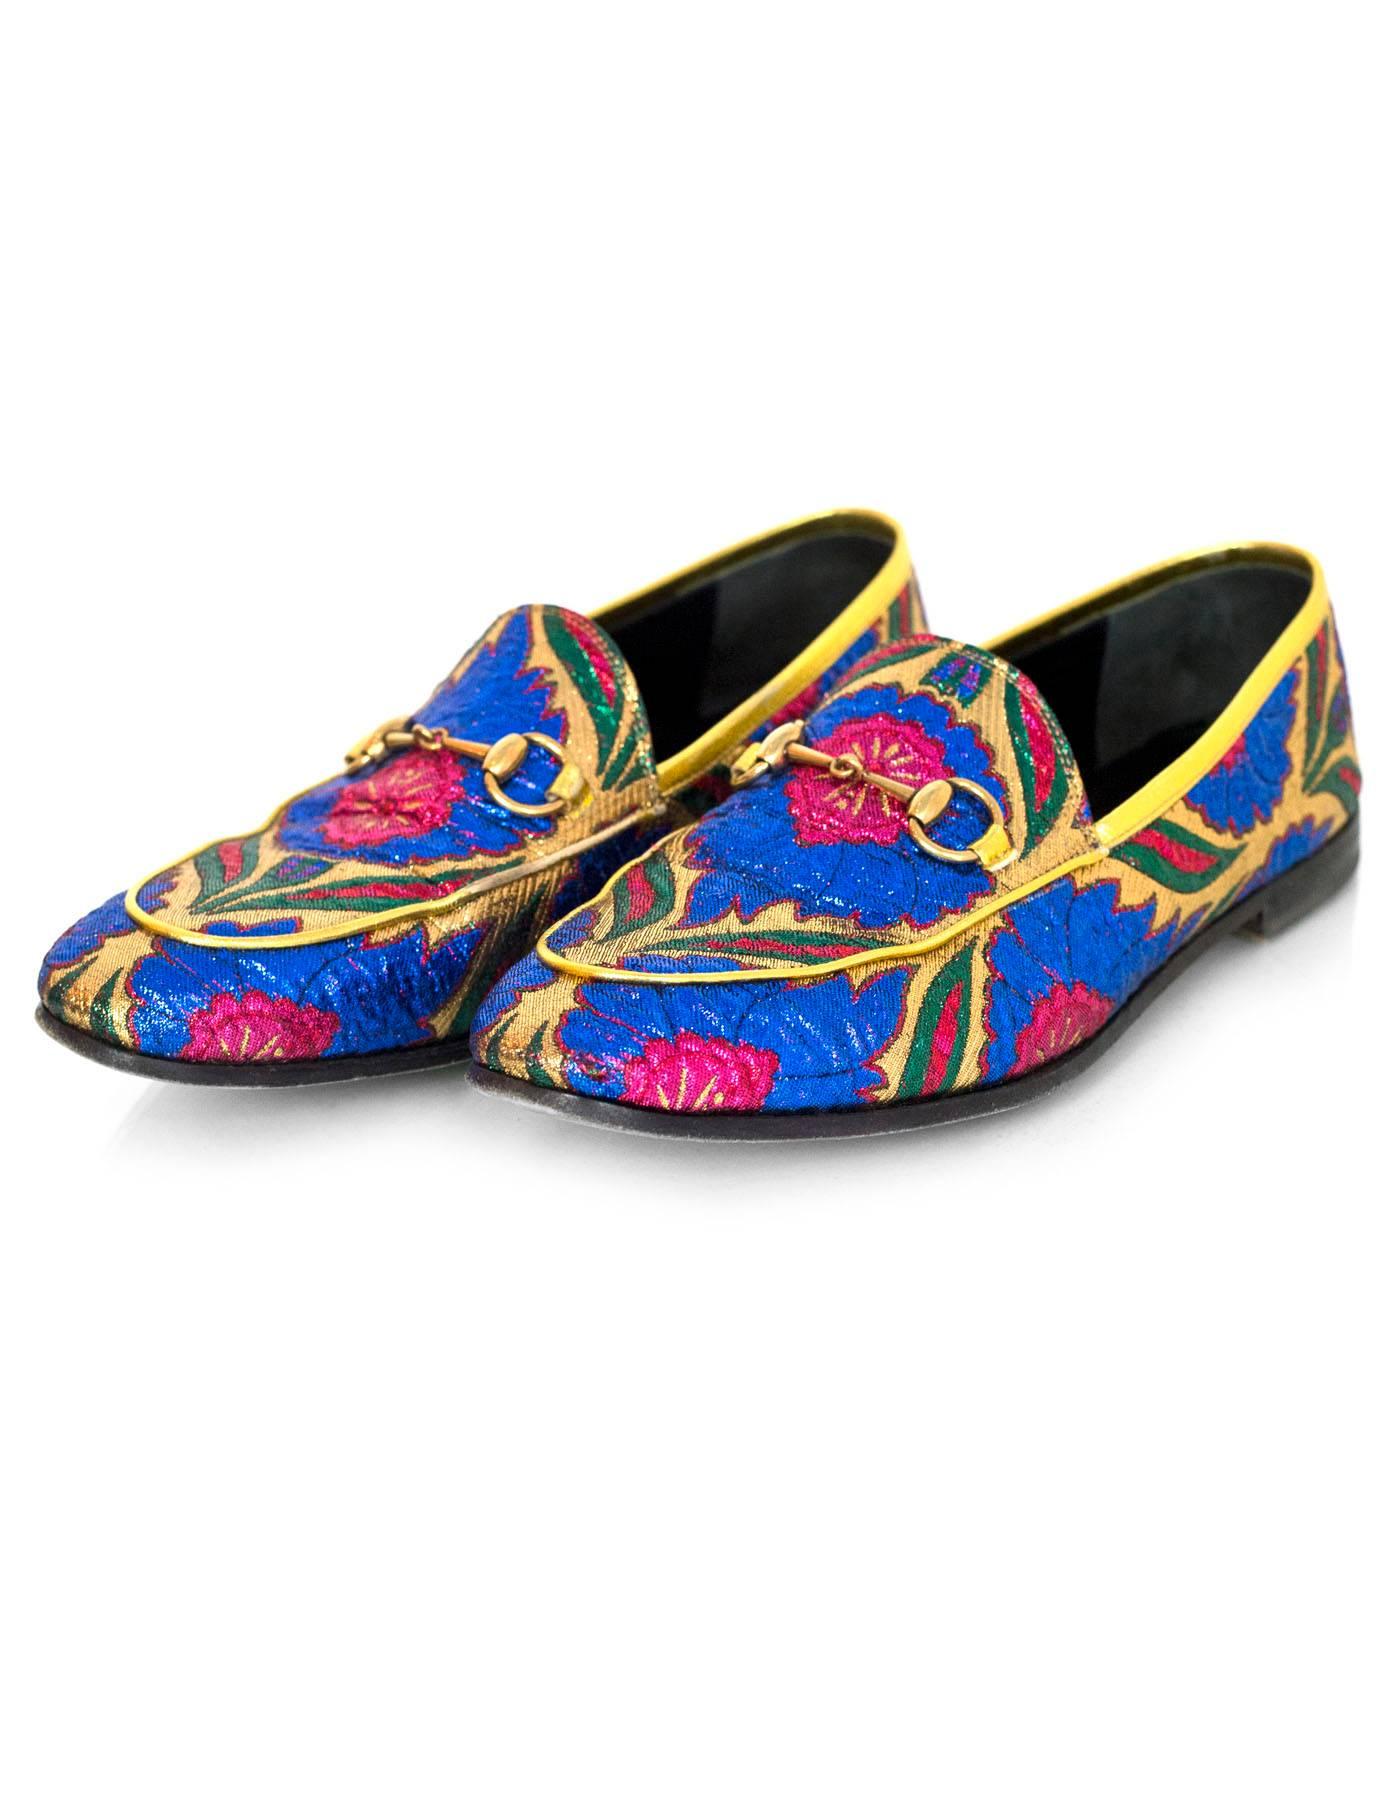 Gucci Brocade Multi-Colored Loafers Sz 38

Made In: Italy
Color: Multi
Materials: Nylon-blend
Closure/Opening: Slip on
Sole Stamp: Gucci Made in Italy 38
Retail Price: $670 + tax
Overall Condition: Excellent pre-owned condition with the exception of